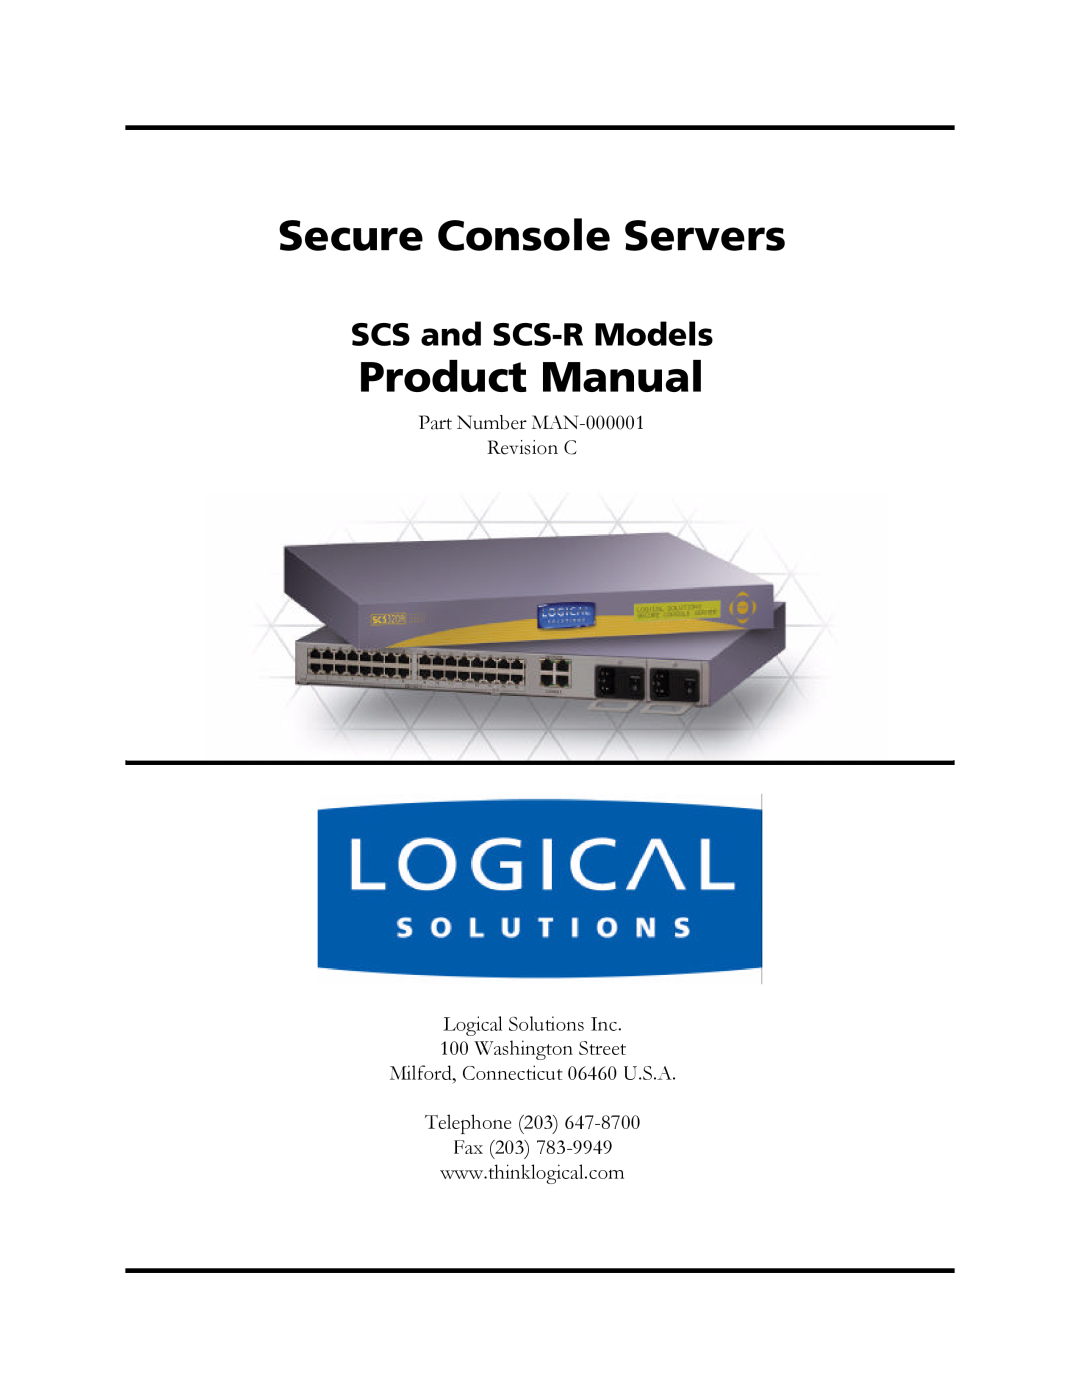 Logical Solutions manual SCS and SCS-R Models, Secure Console Servers, Product Manual 